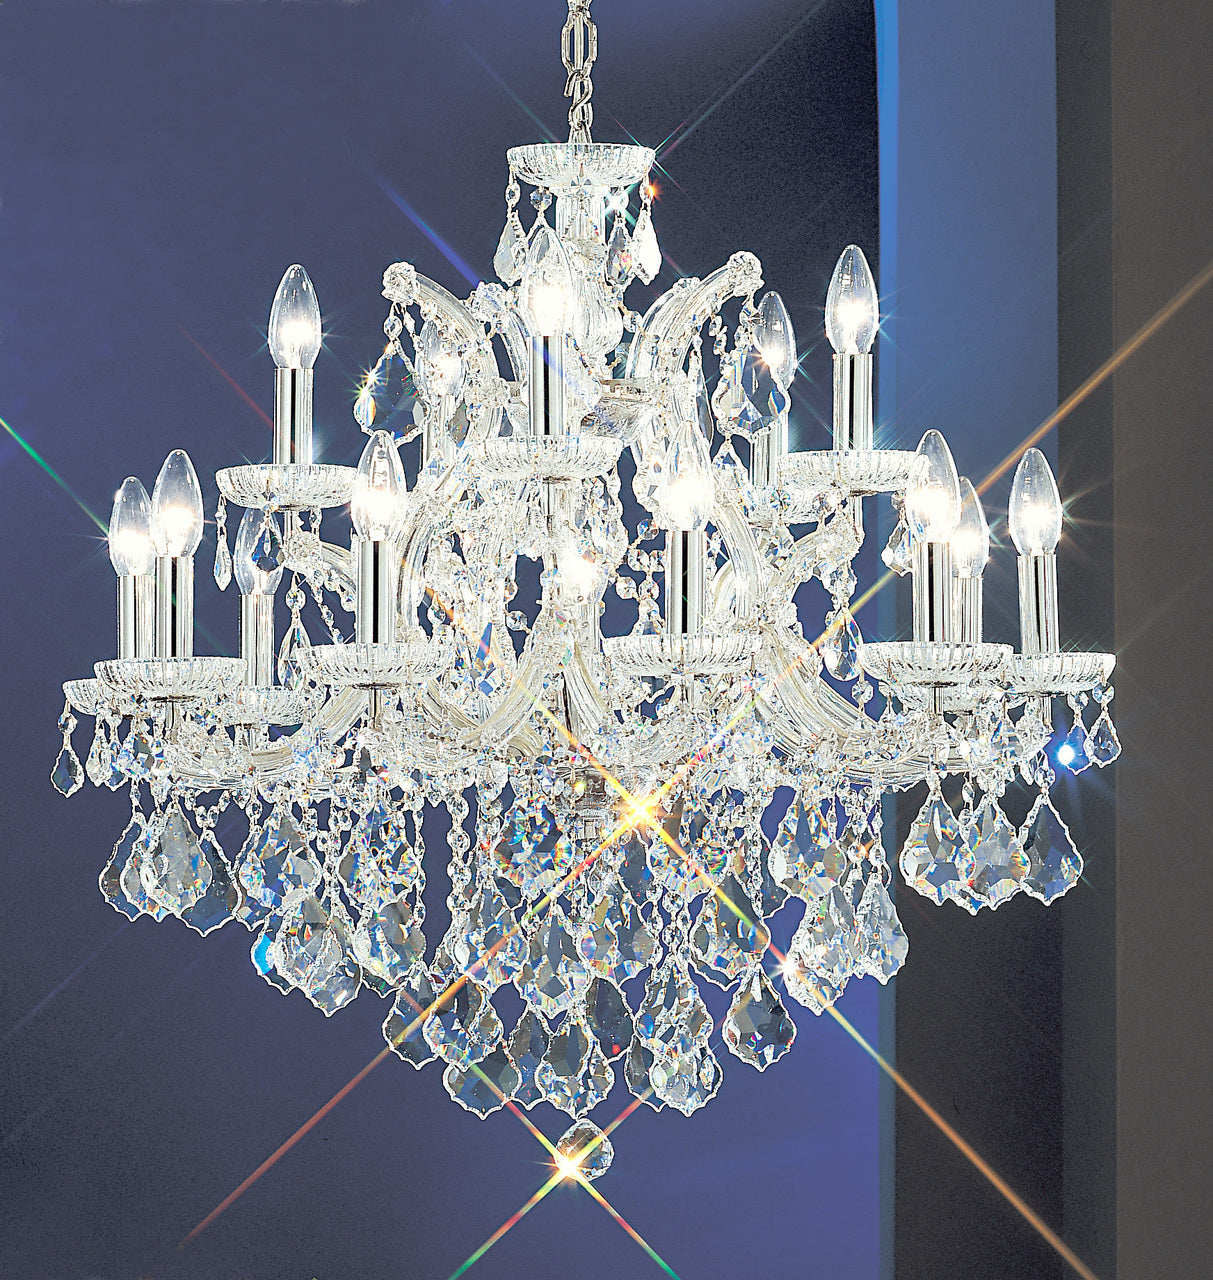 Classic Lighting 8136 OWG S Maria Theresa Traditional Crystal Chandelier in Olde World Gold (Imported from Italy)